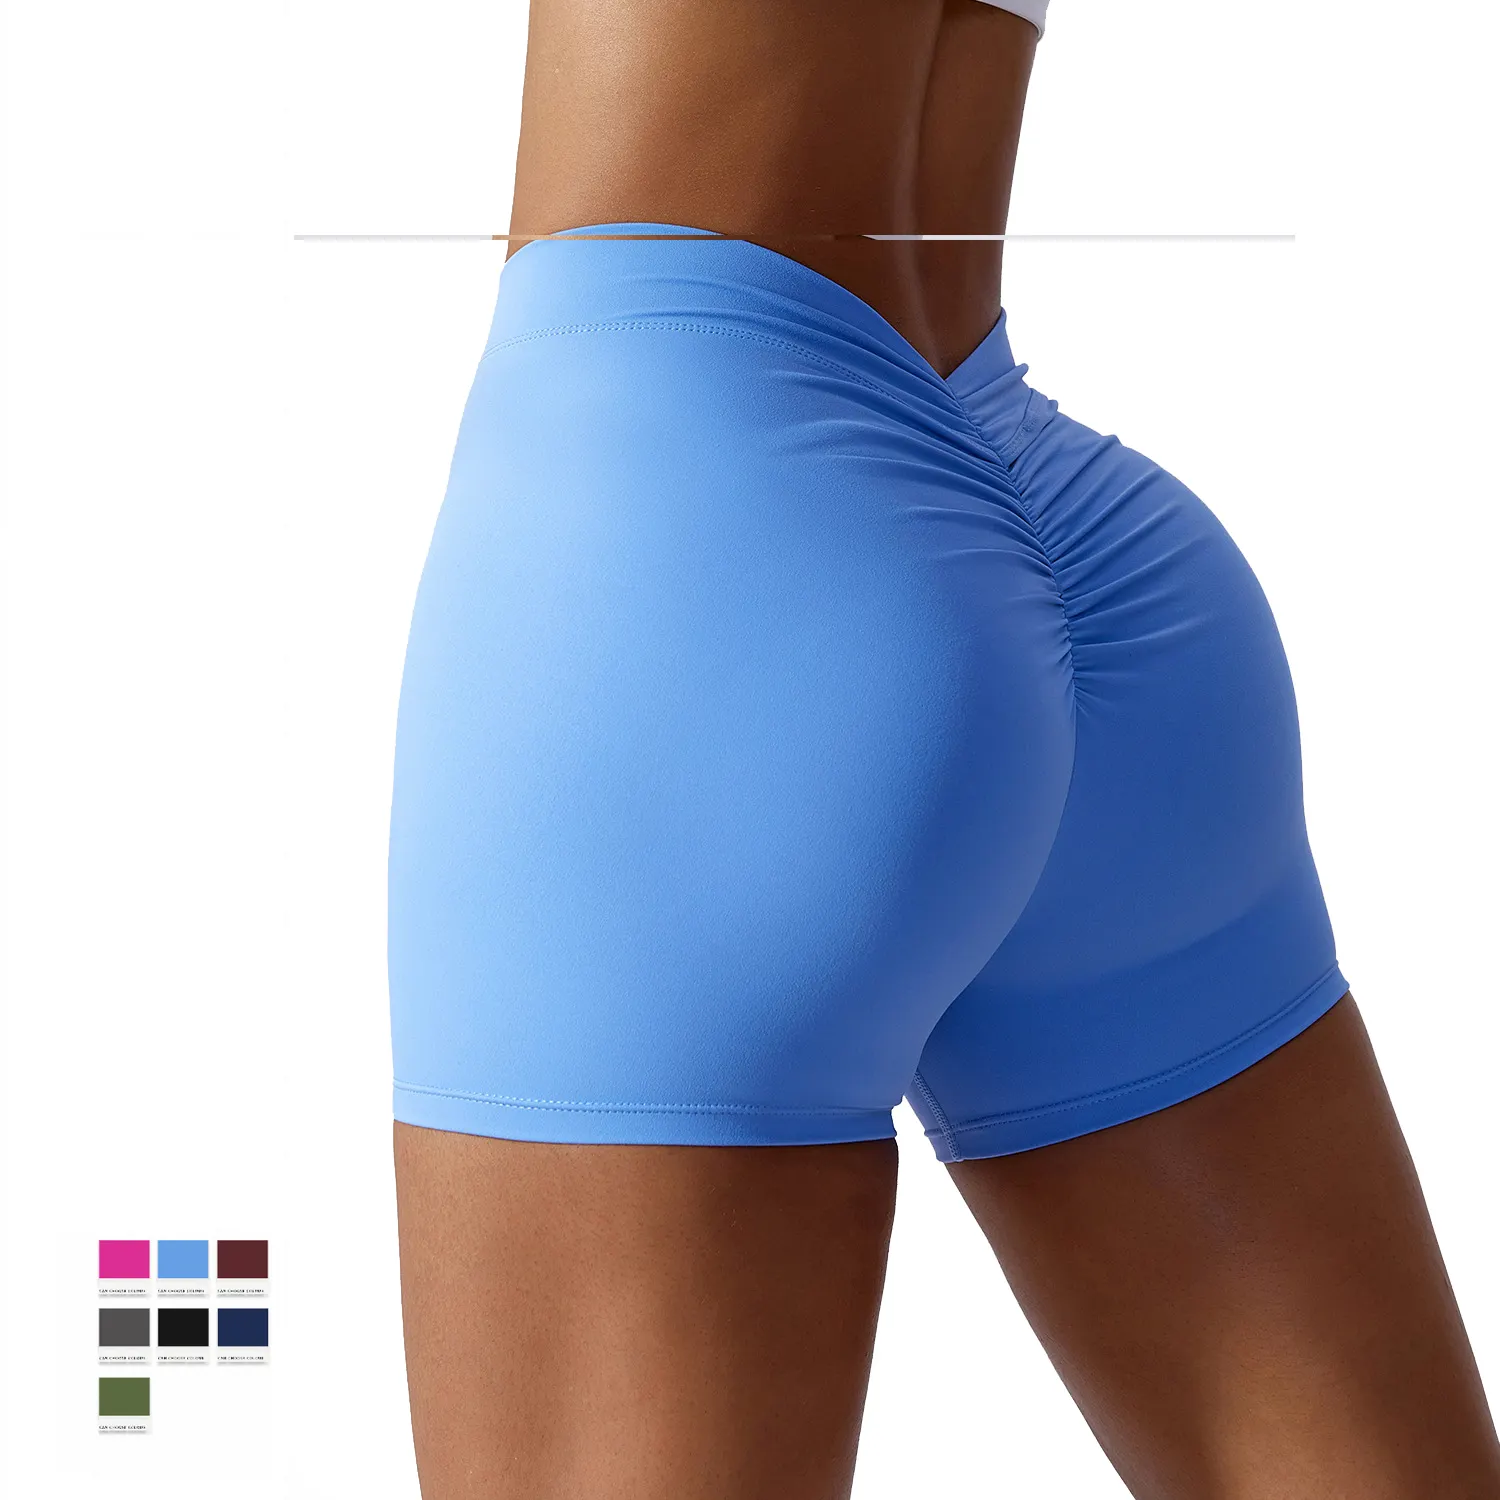 NEW Brushed Women's High Waist Yoga Pants Tummy Control Workout Ruched Butt Lifting Stretchy shorts